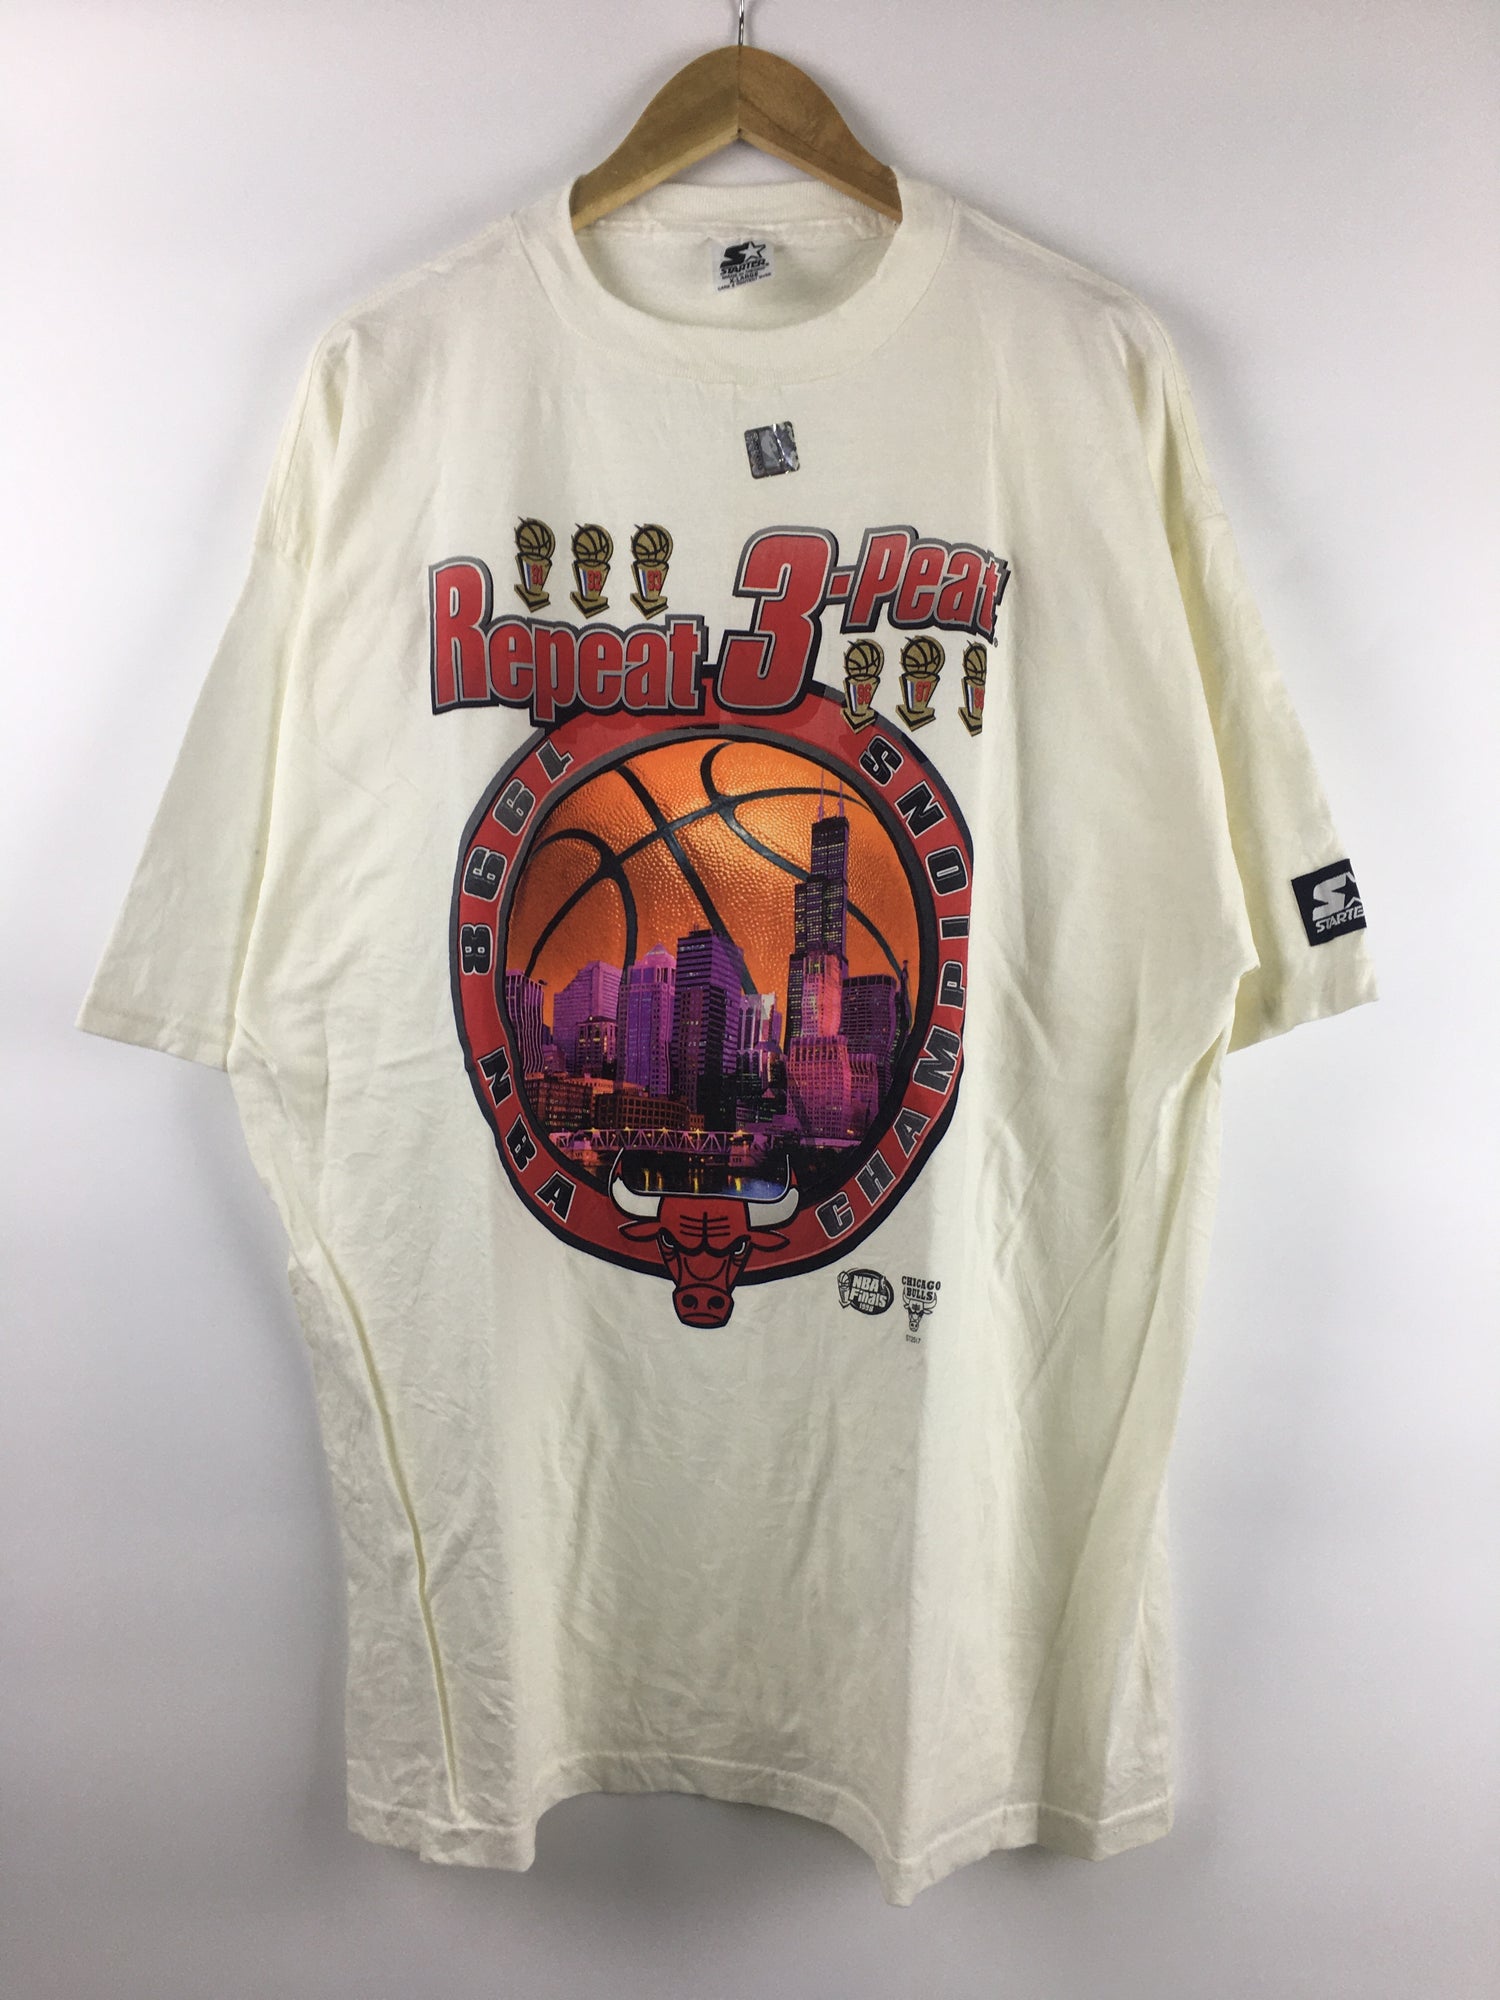 Vintage NBA Chicago Bulls 1998 Champions Tee Shirt Size XL Made in USA